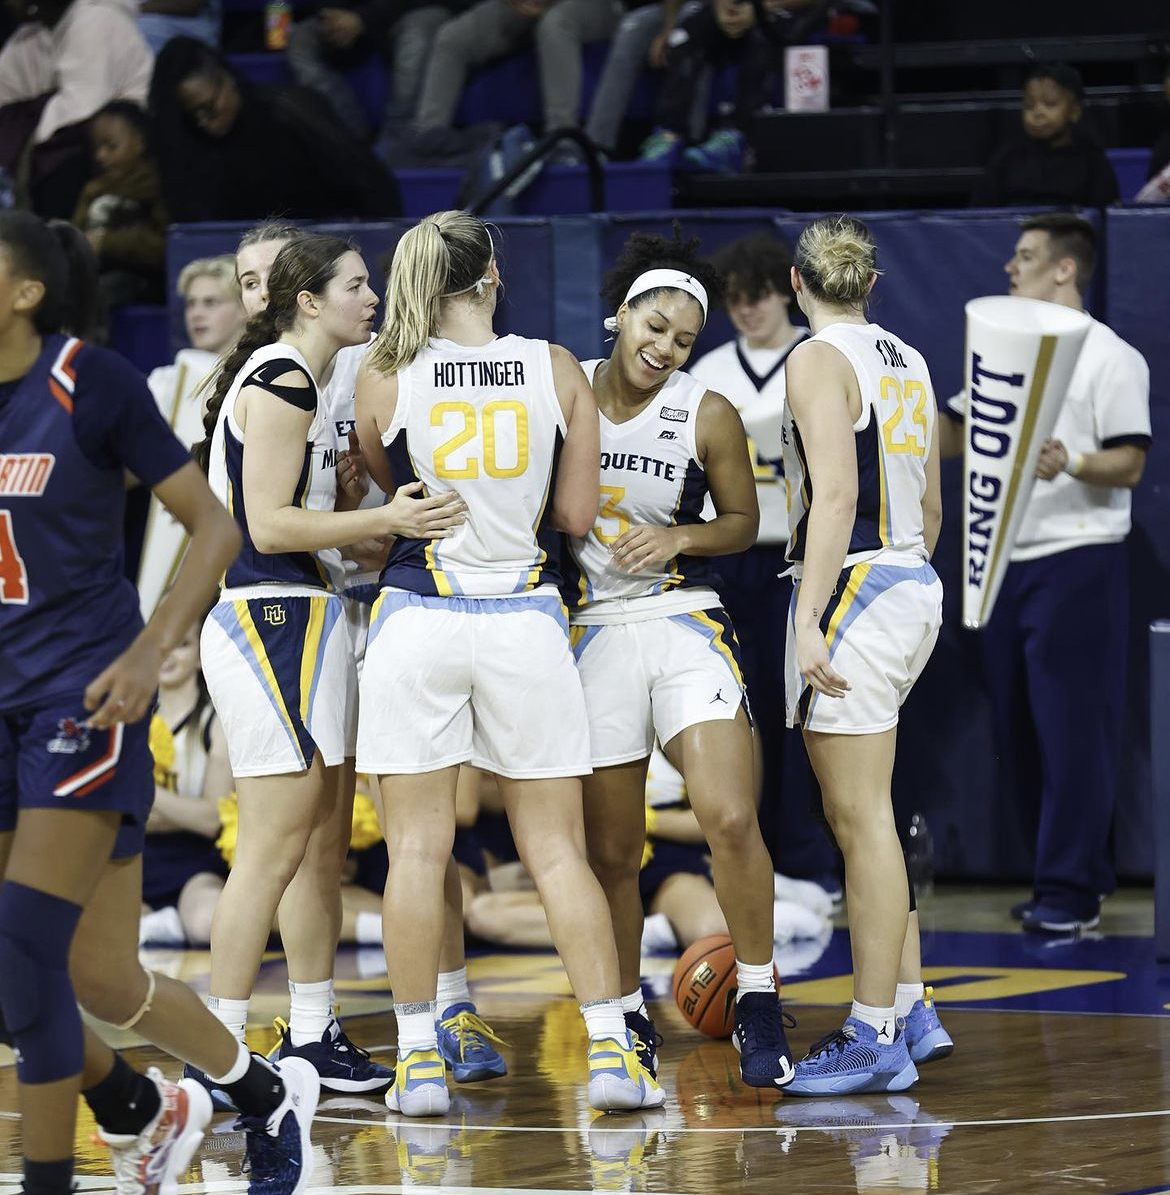 Marquette womens basketball has six new players and two new assistant coaches this season. (Photo courtesy of Marquette Athletics.)